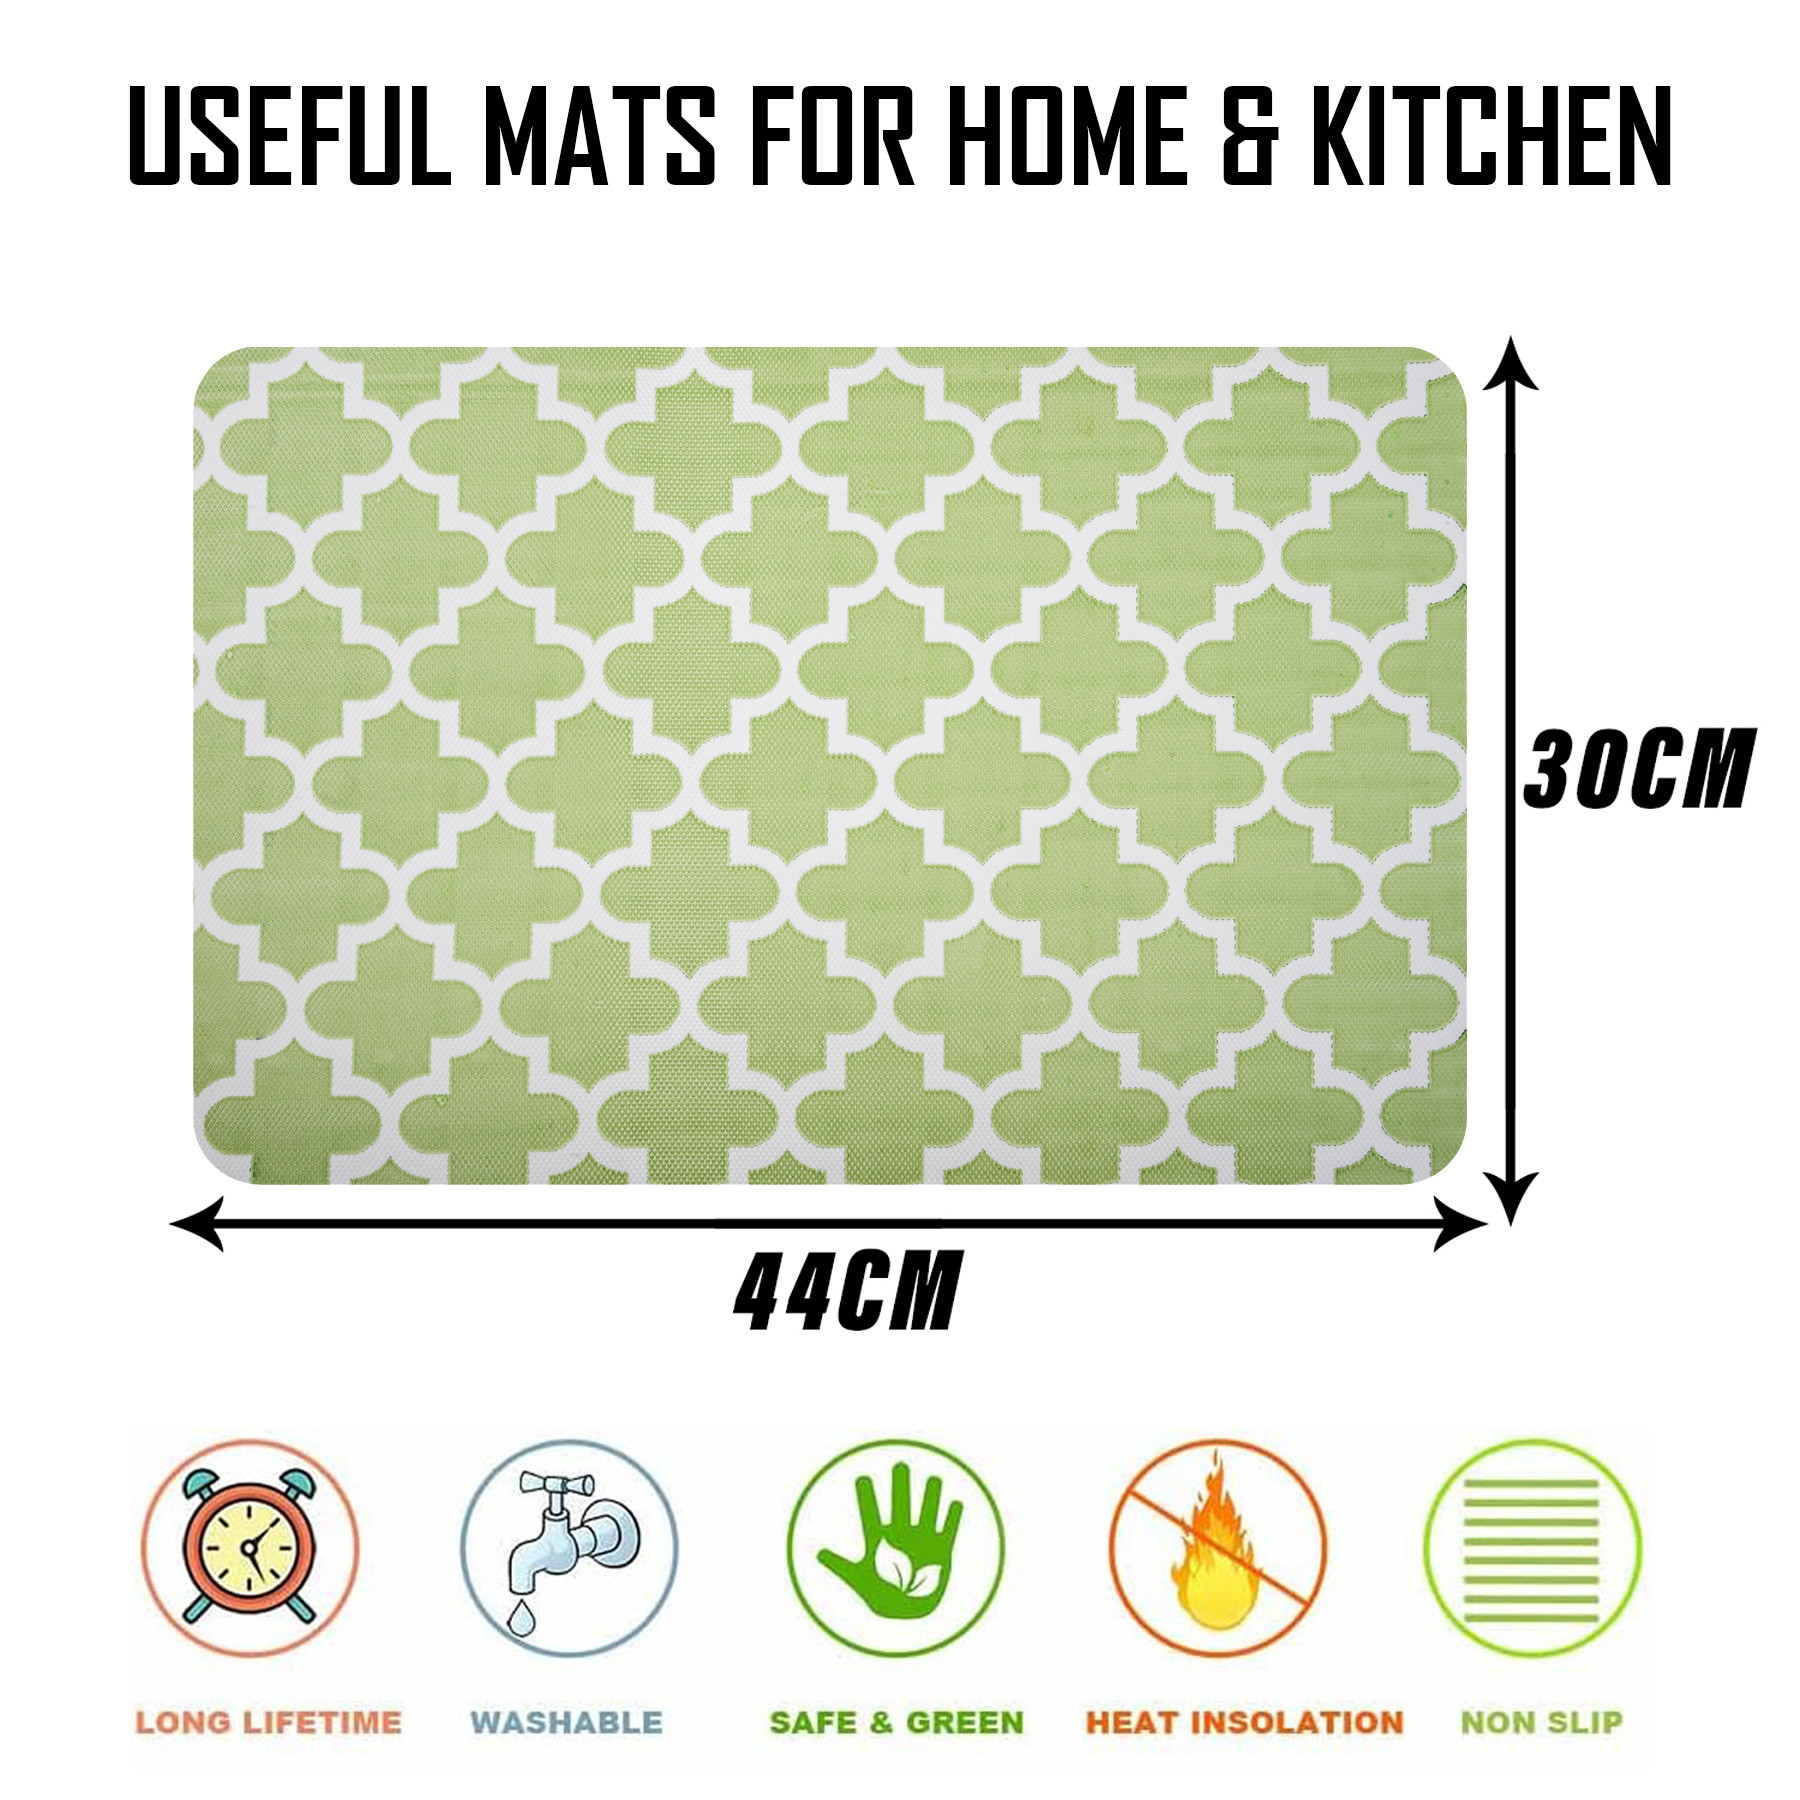 Kuber Industries Placemat | Placemats for Dining Room | Anti-Slip Table Mat Set | Placemats for Kitchen Table | Dining Table Placemats | Hexagon-Design Placemat | 6 Piece Set | Green